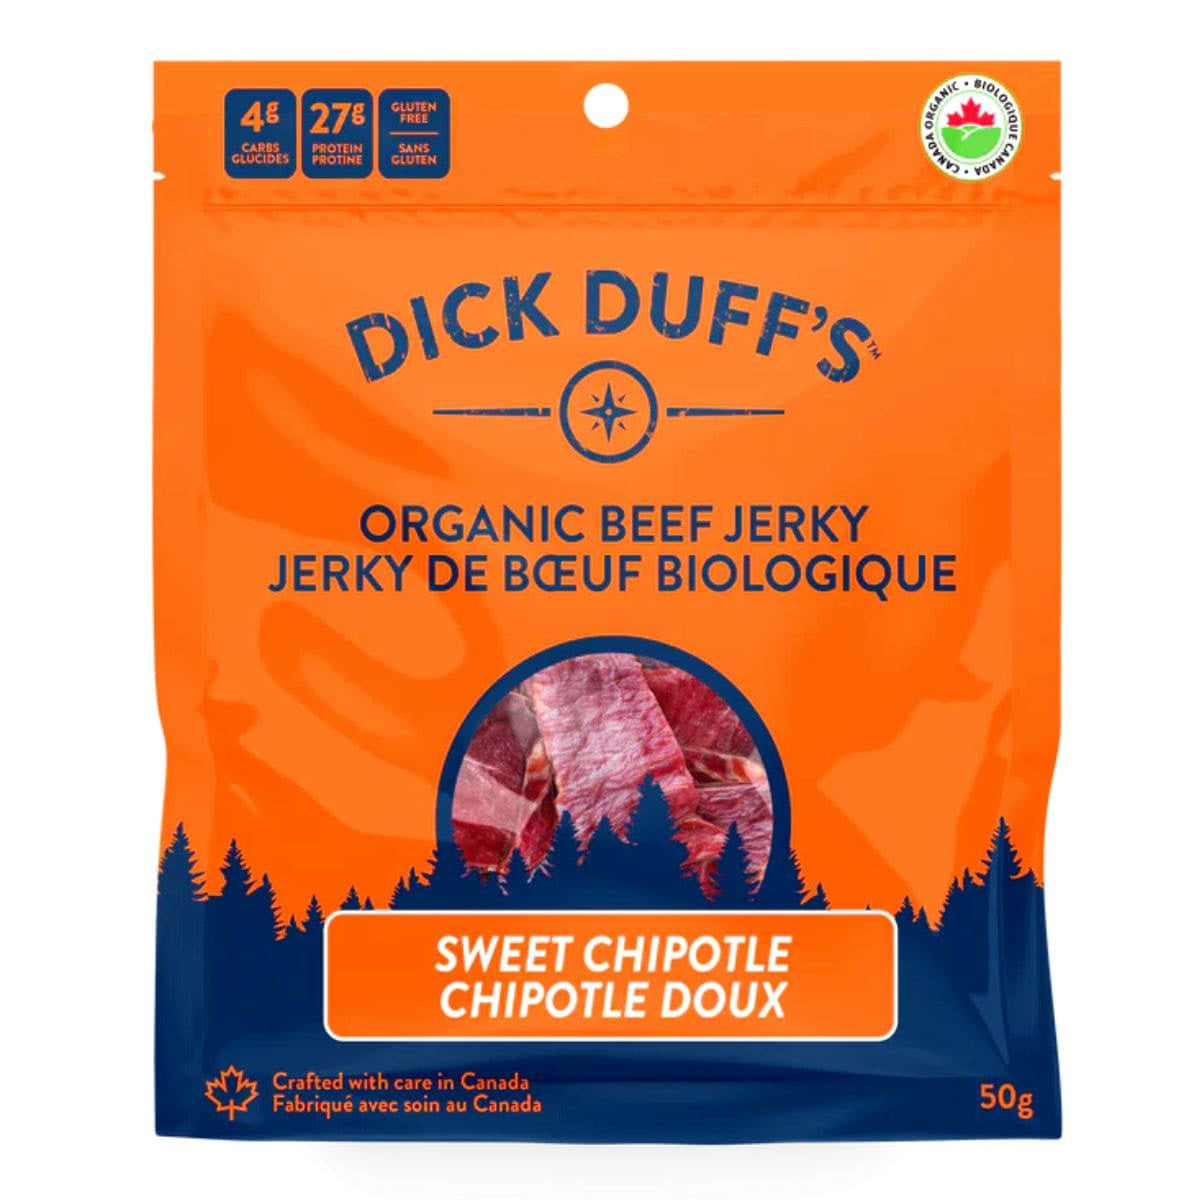 Dick Duff's Sweet Chipotle Beef Jerky_1_cc